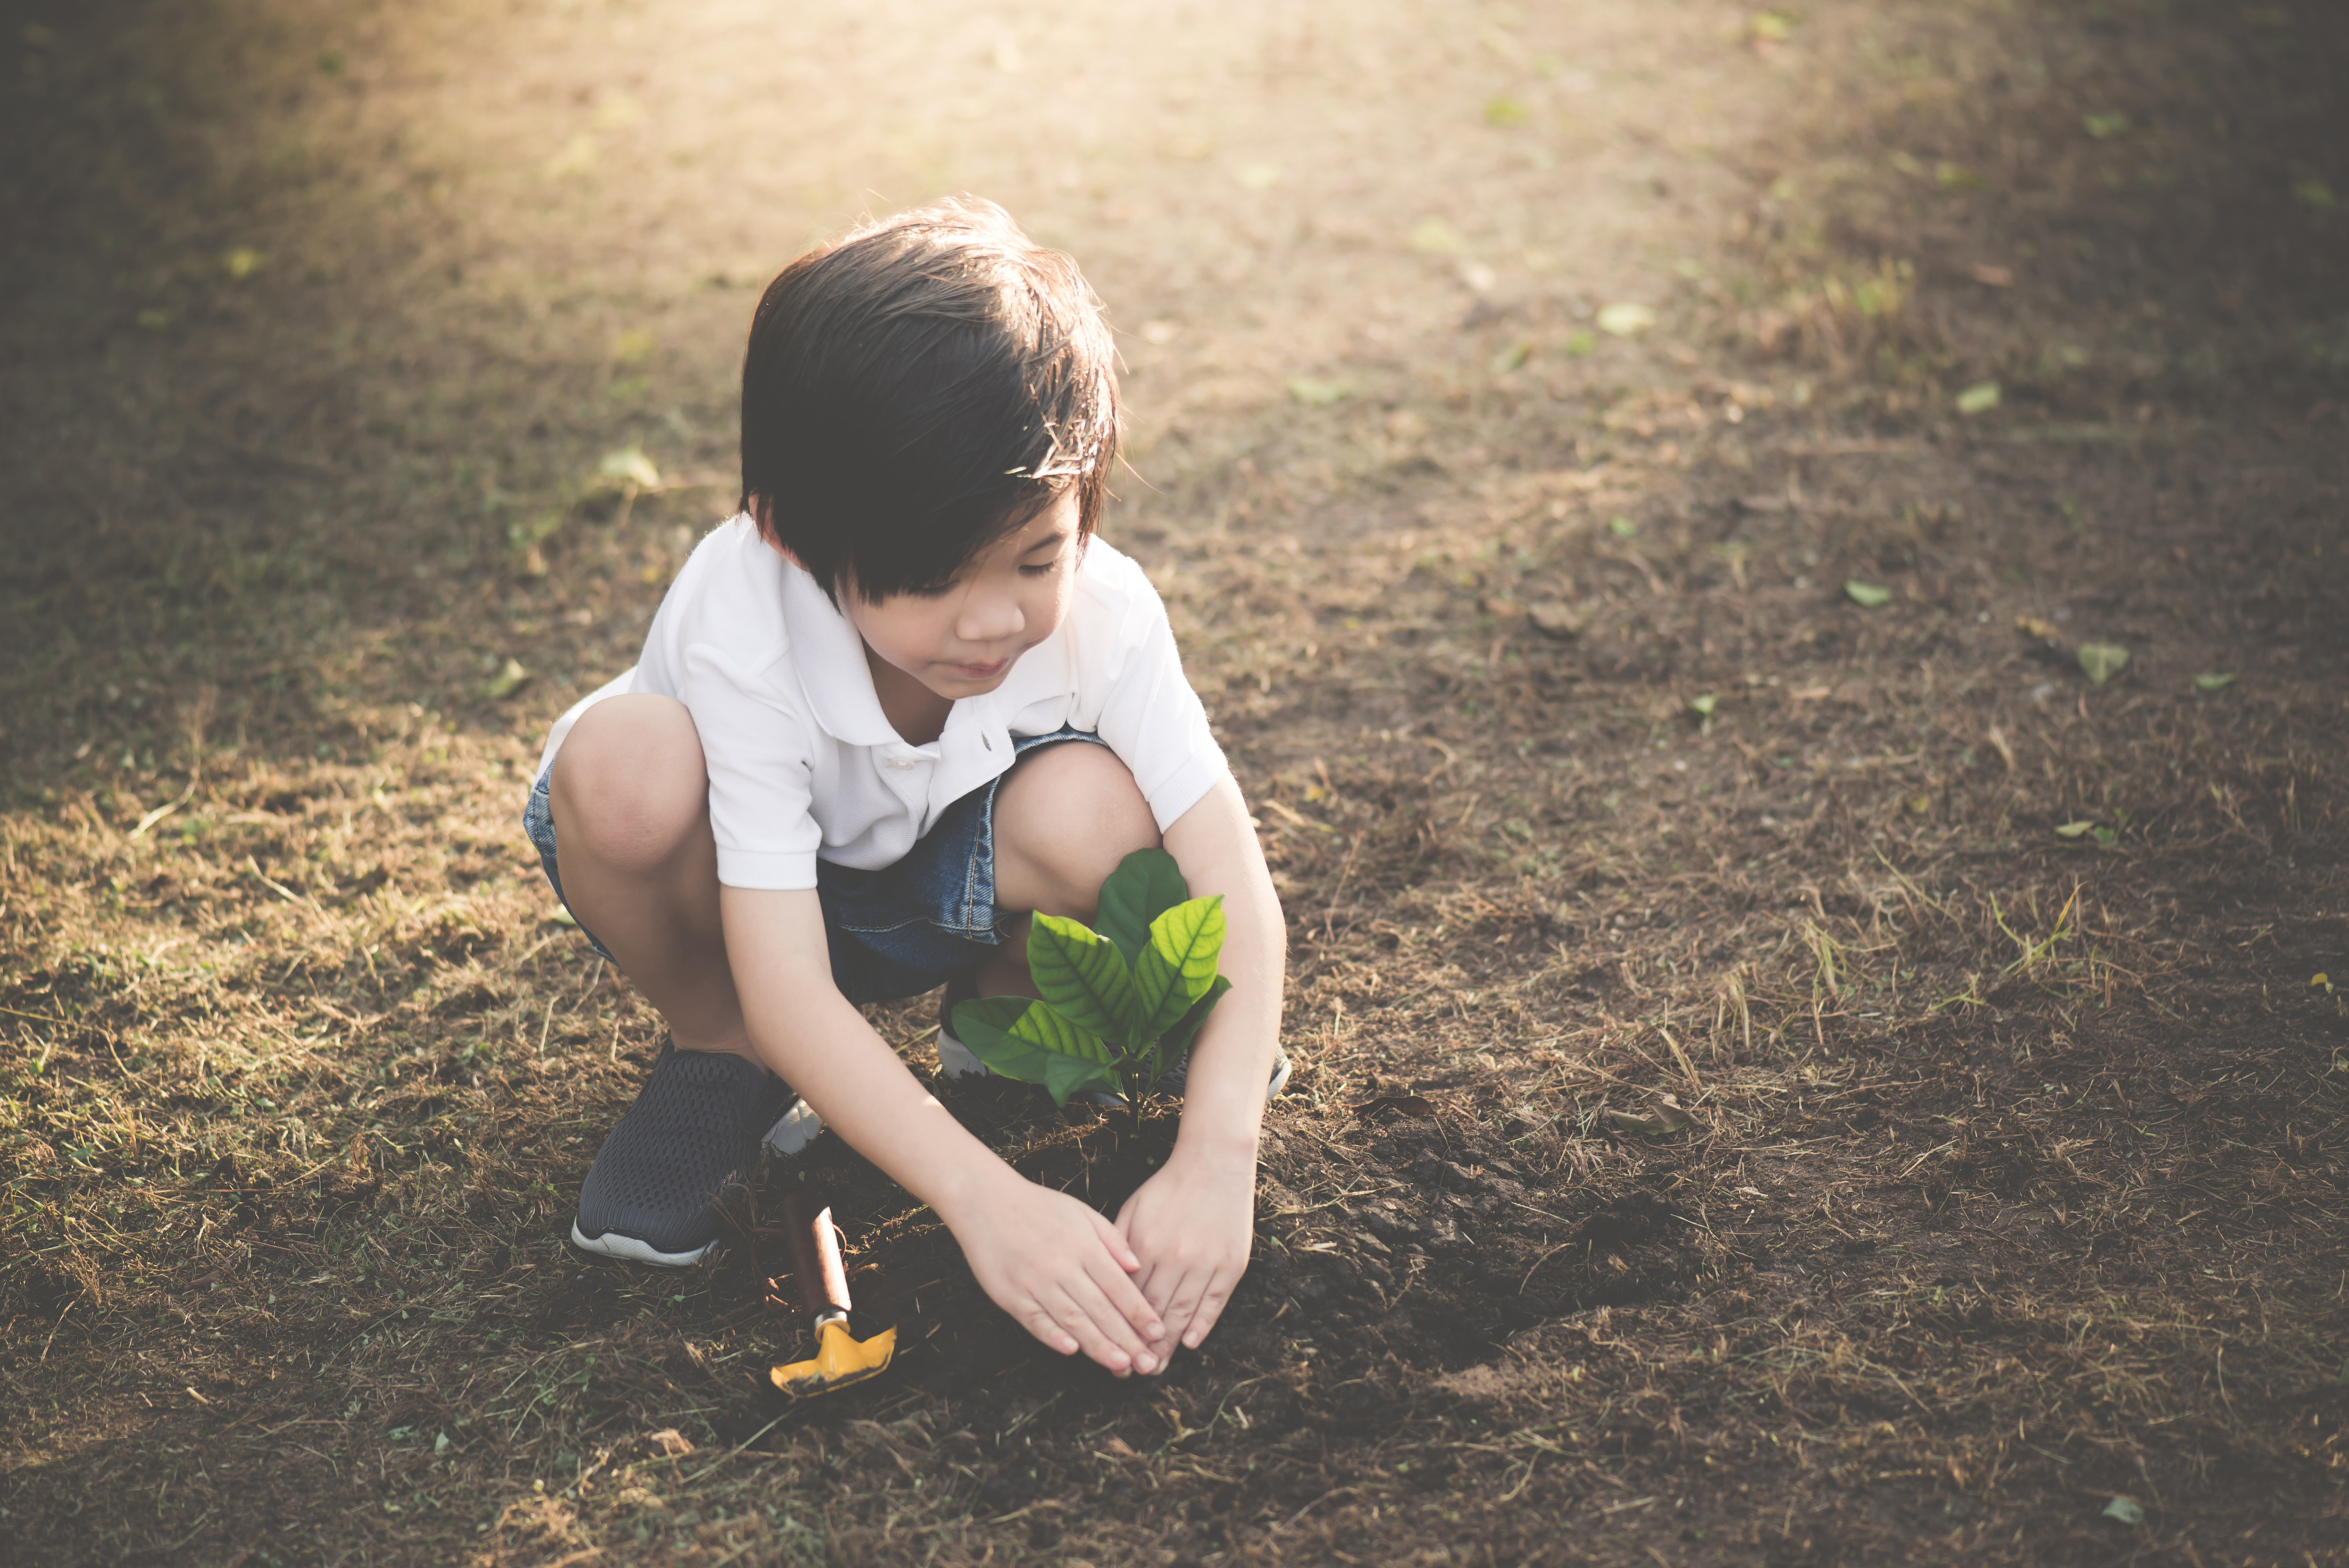 Boy sitting in mud and planting tree